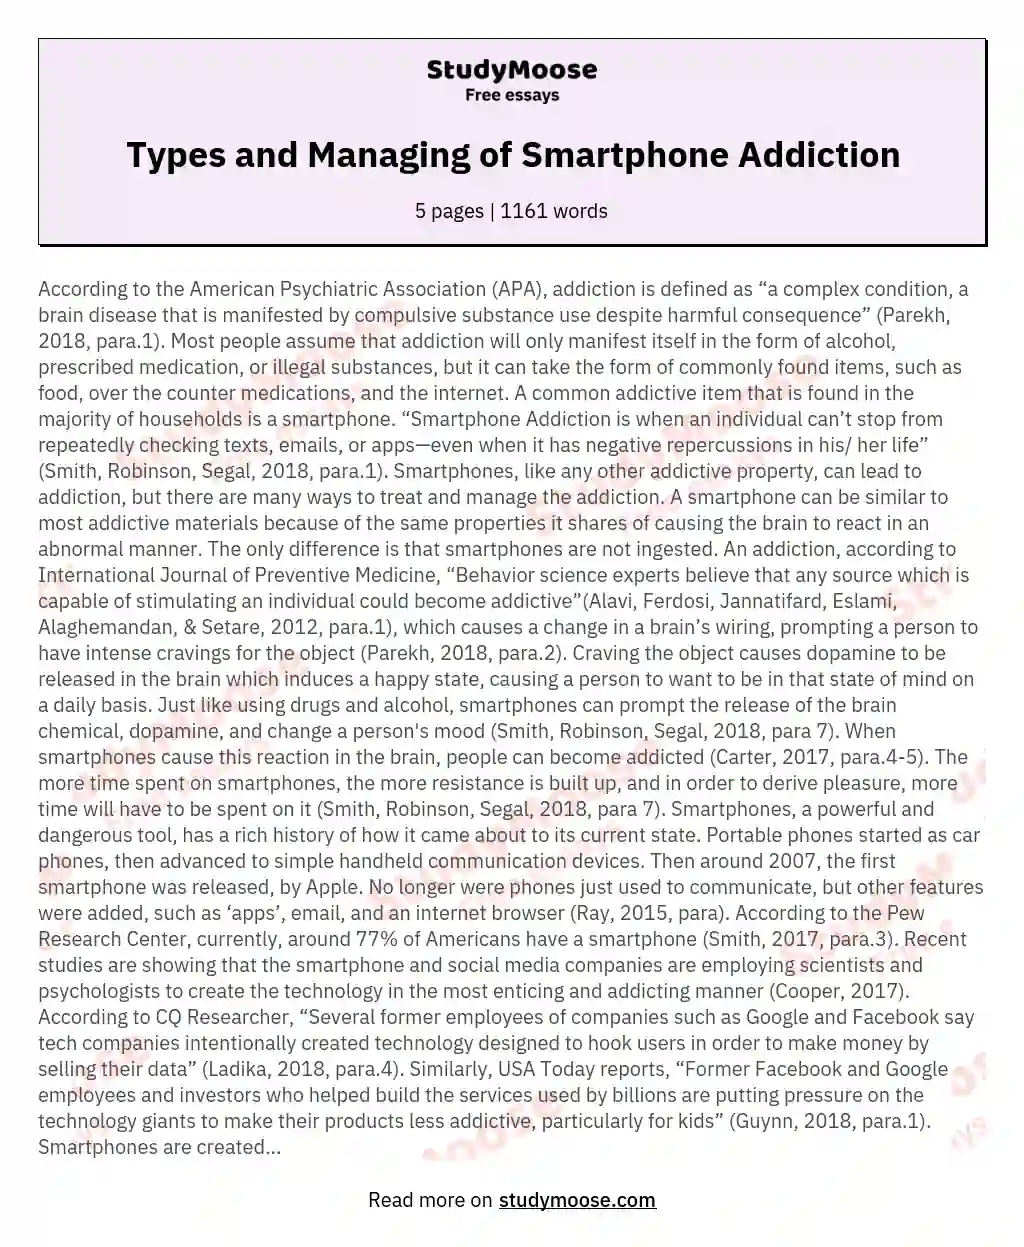 Types and Managing of Smartphone Addiction essay